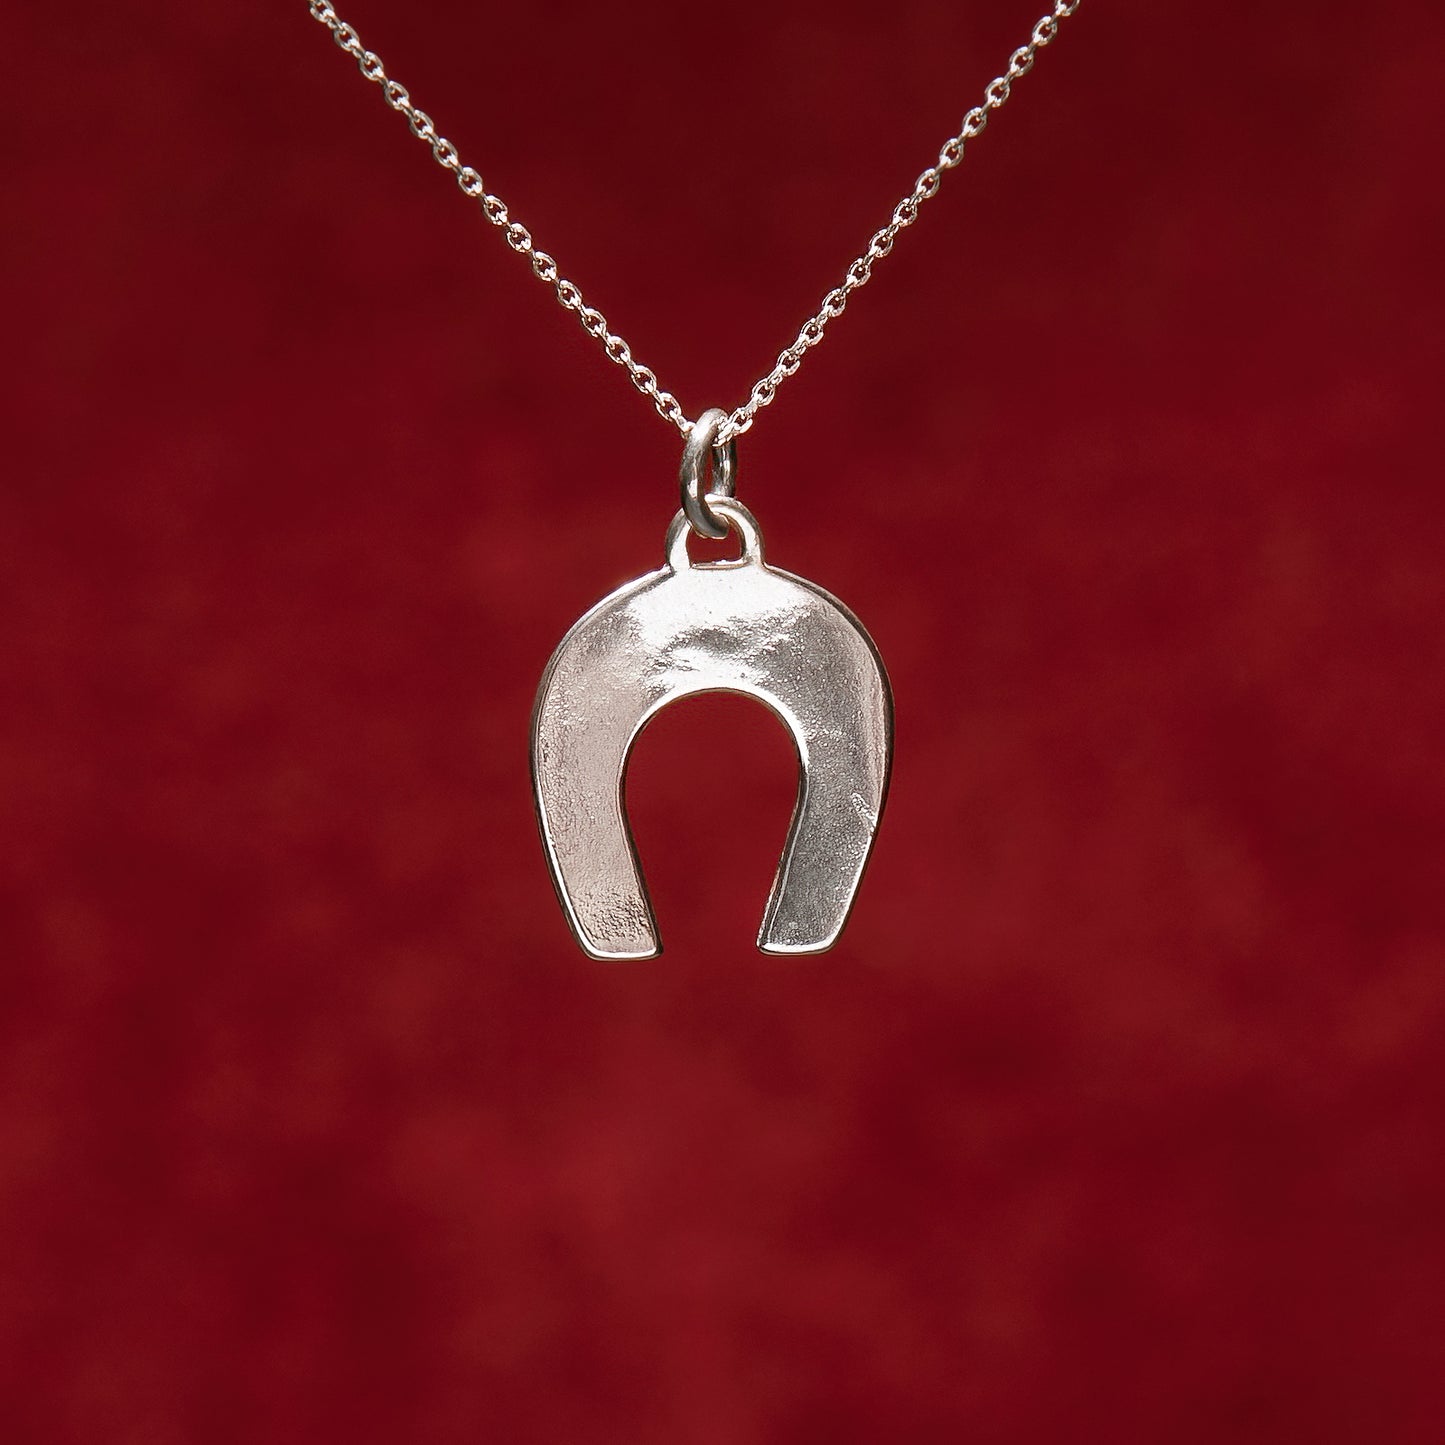 Horse shoe lucky charm